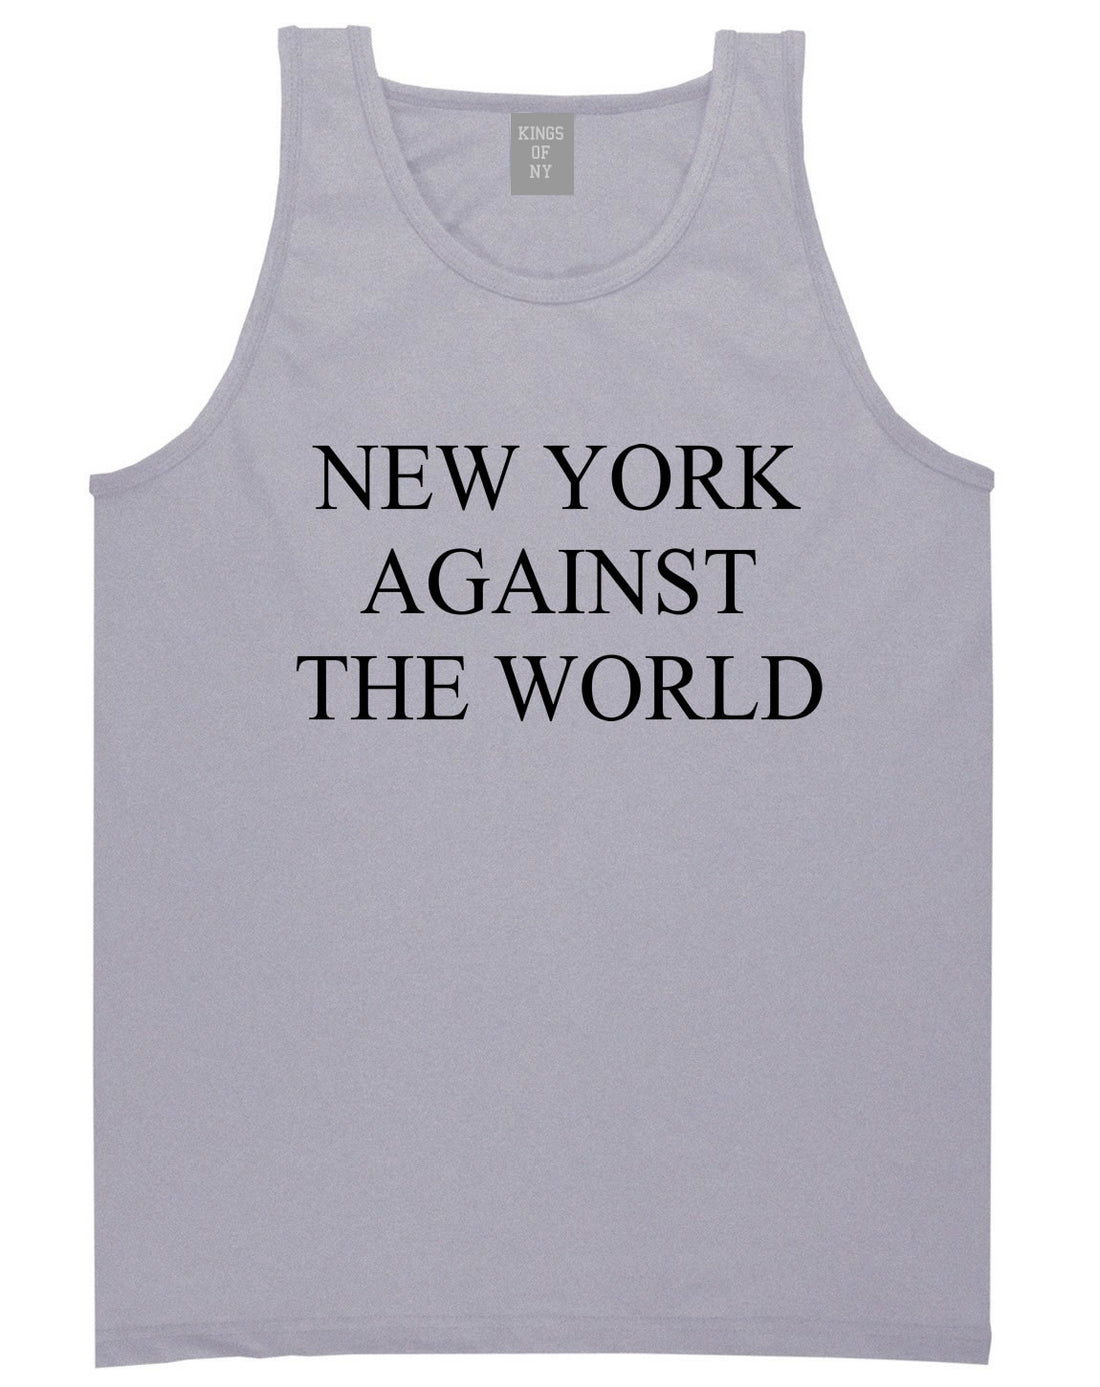 New York Against The World Tank Top in Grey by Kings Of NY